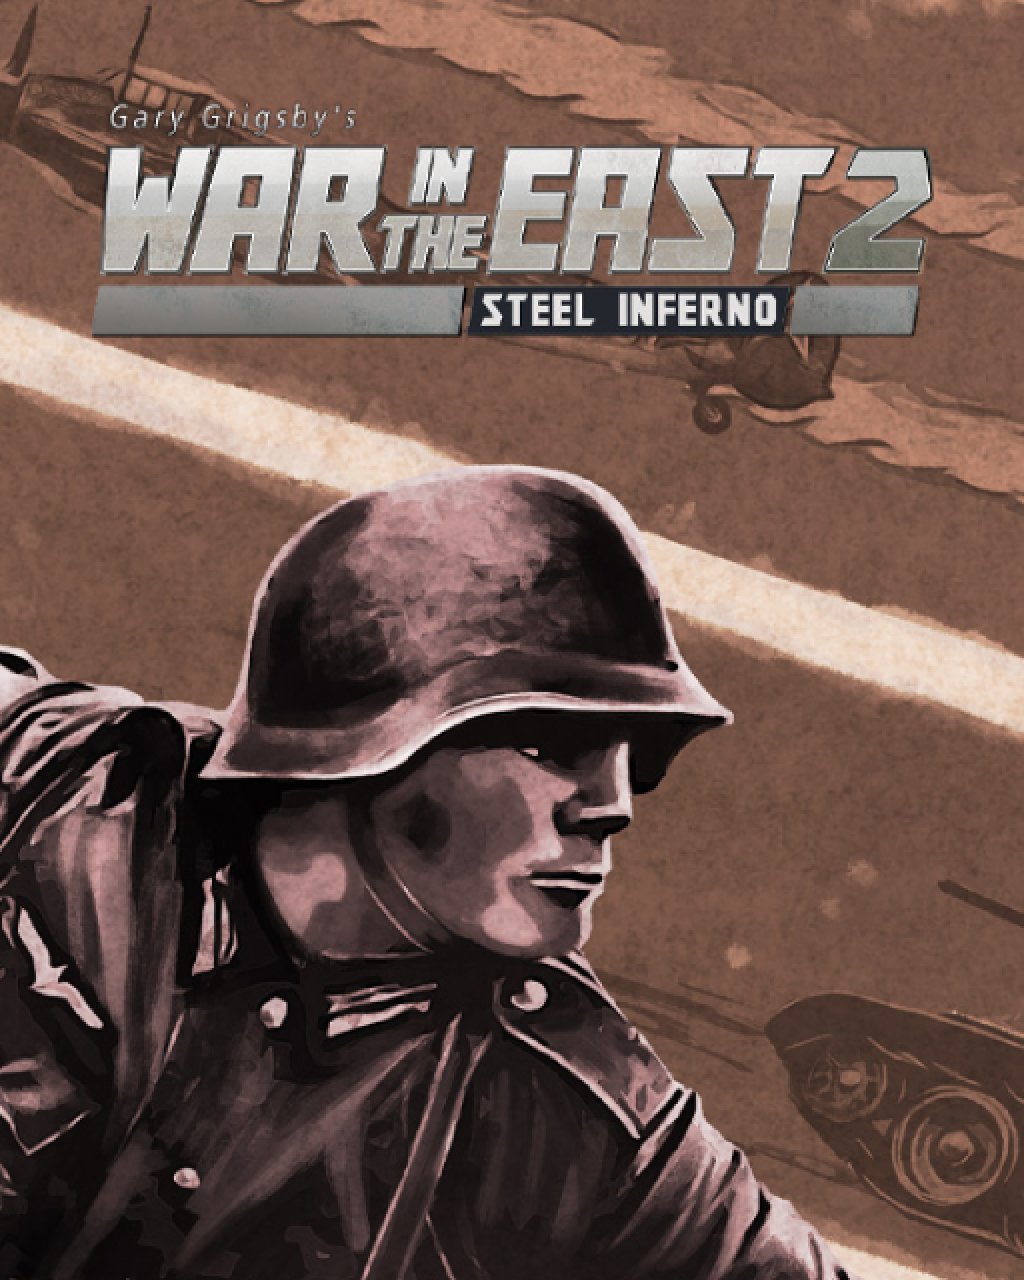 Gary Grigsby's War in the East 2 Steel Inferno